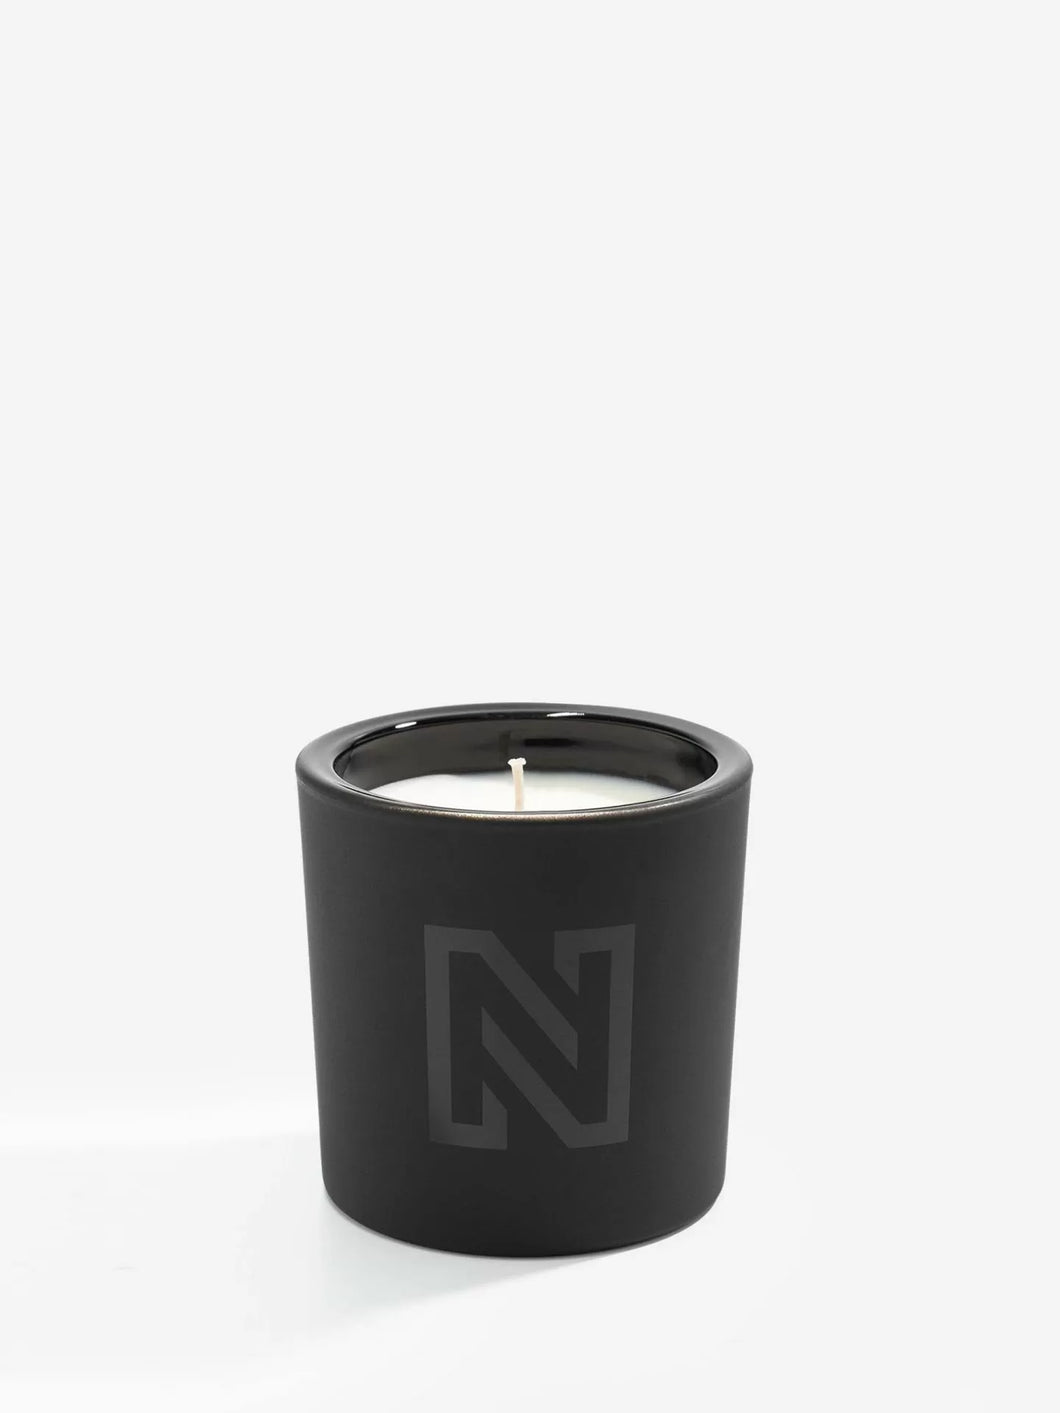 NHome Scented Home Candle London Muse H 1-013 0000 9000 Black